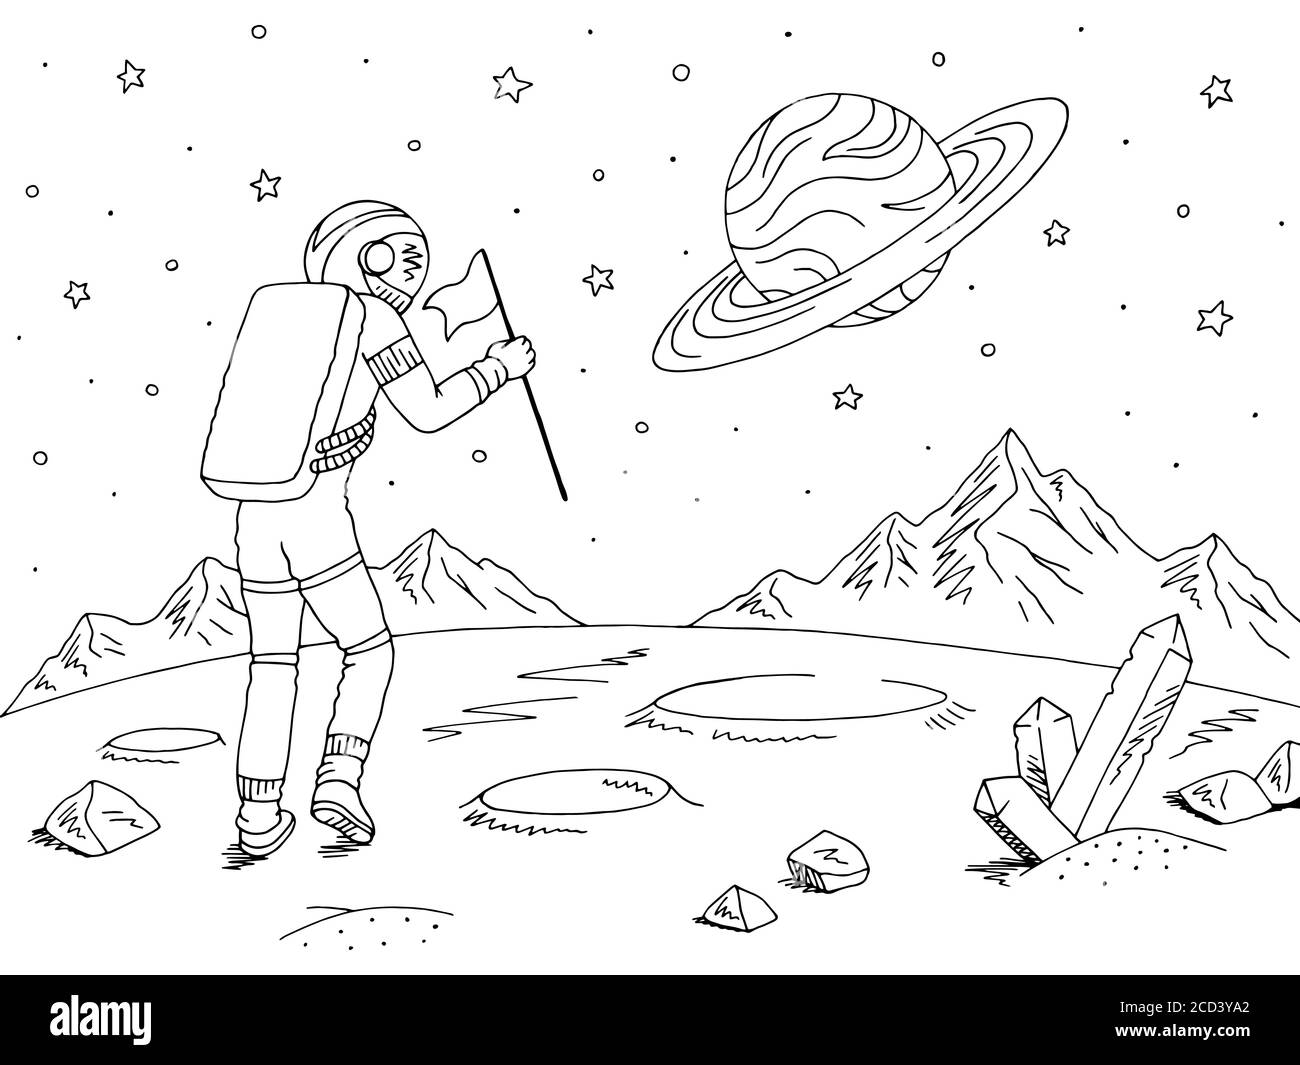 Spaceman astronaut walking with flag. Alien planet graphic black white space landscape sketch illustration vector Stock Vector